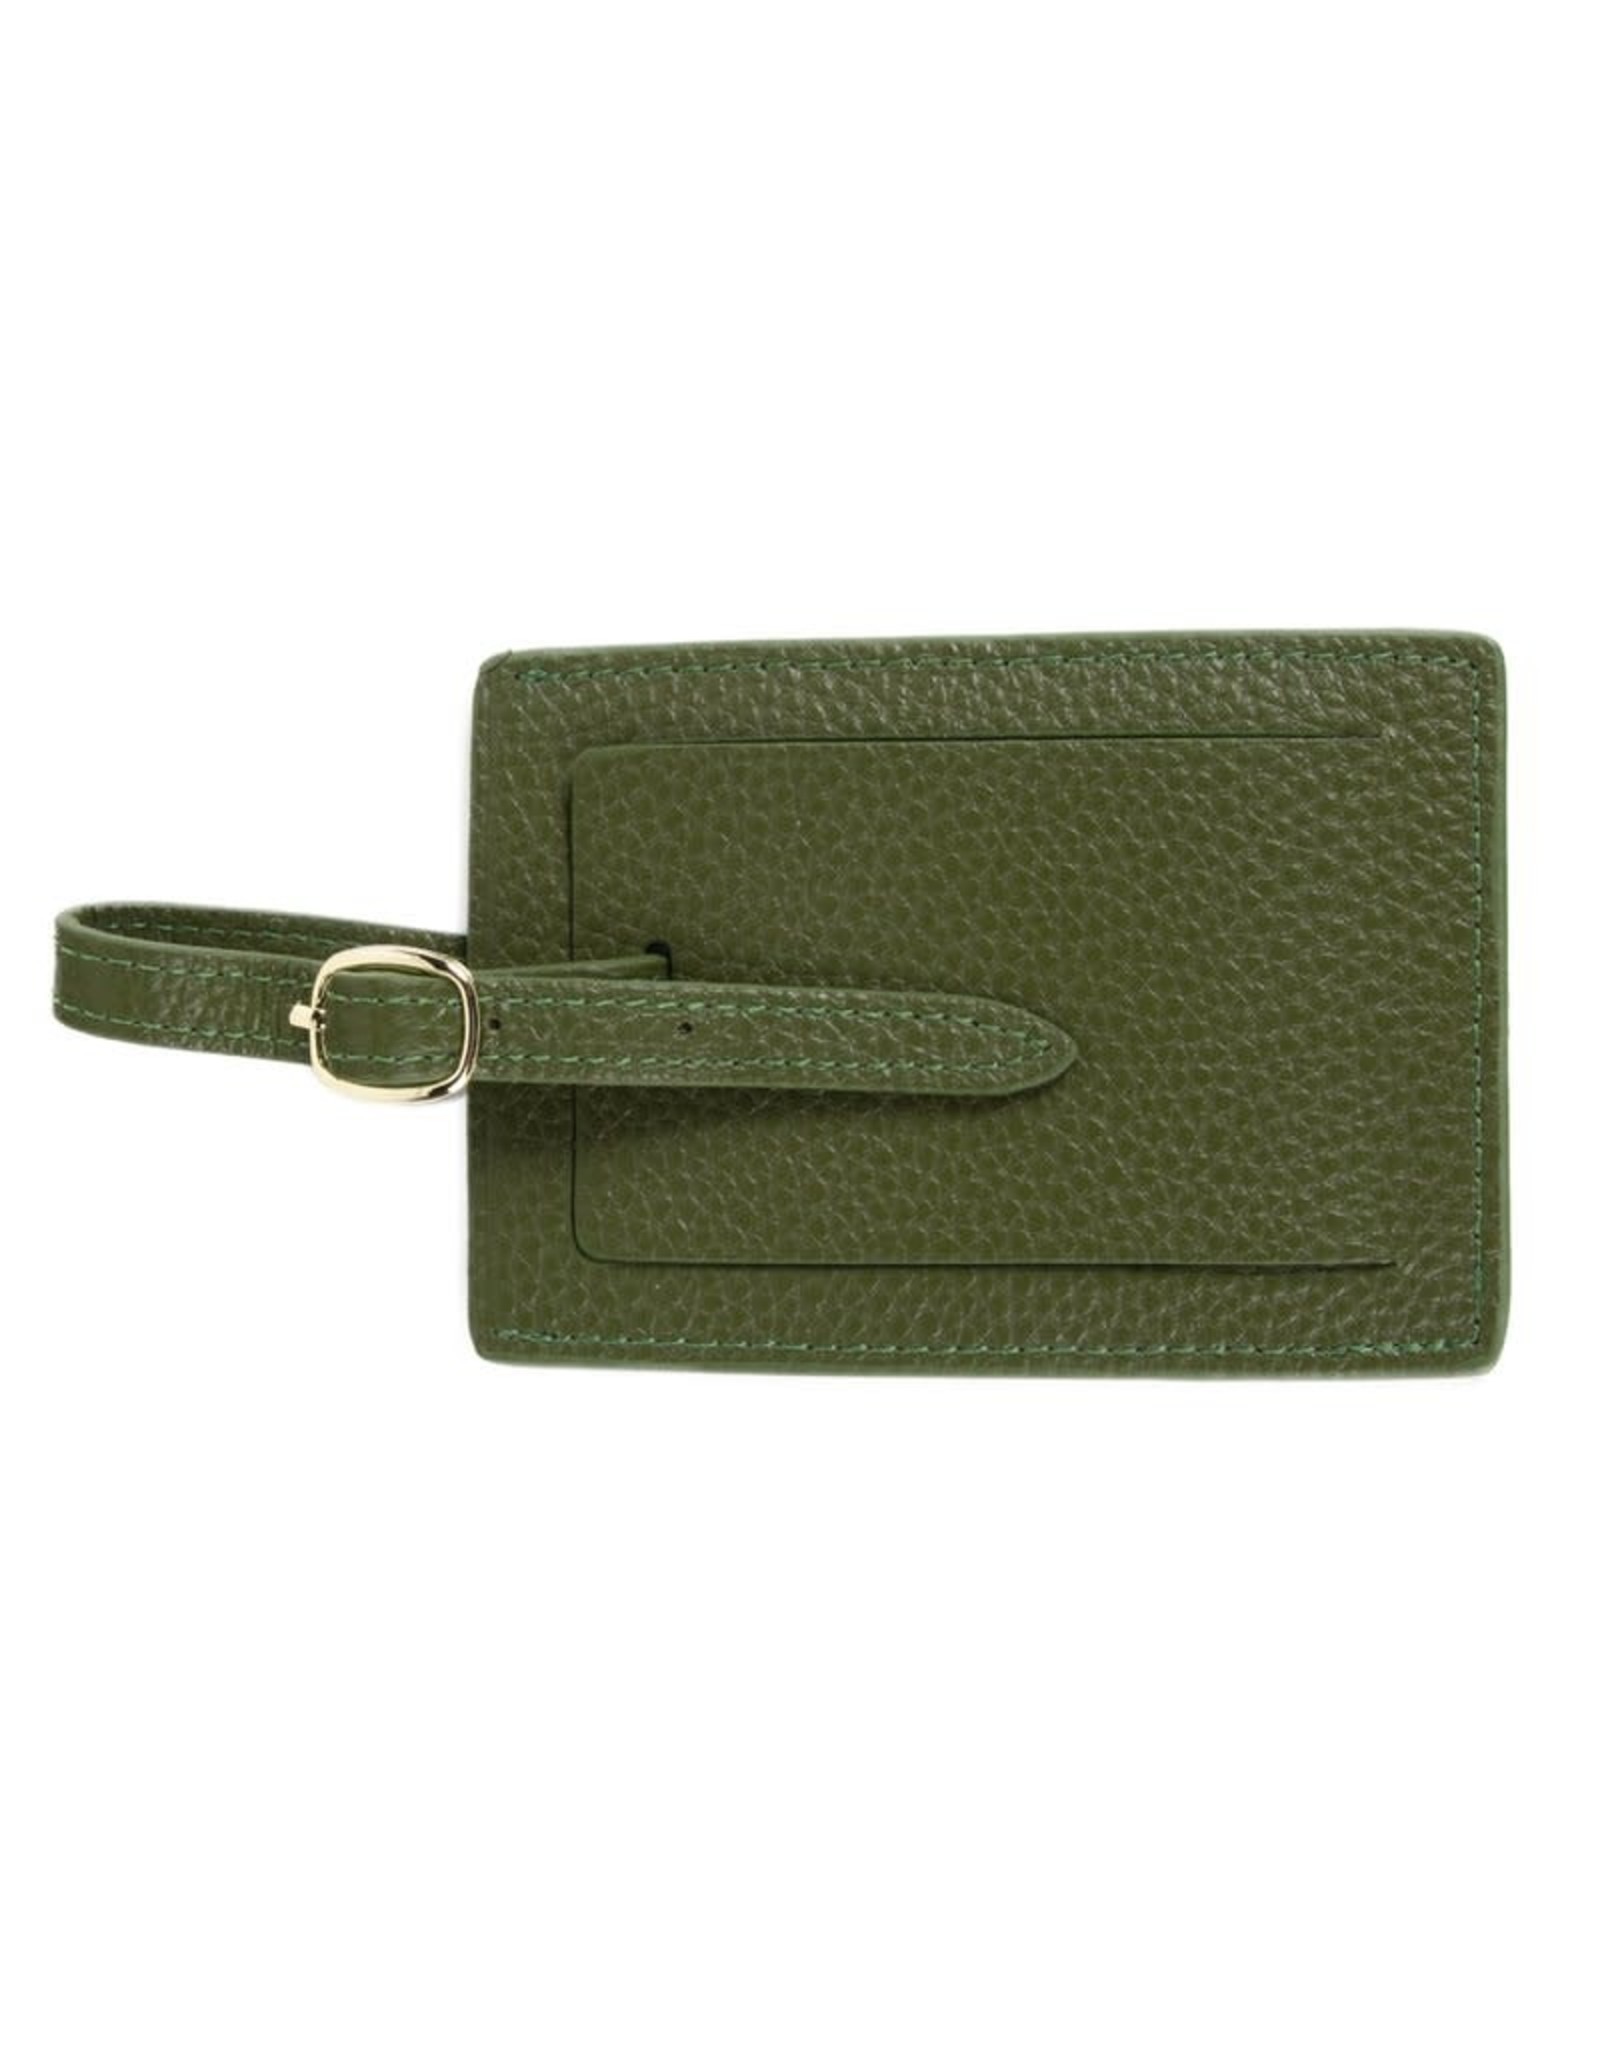 Brouk & Co Luggage Tag Stanford Forest Green